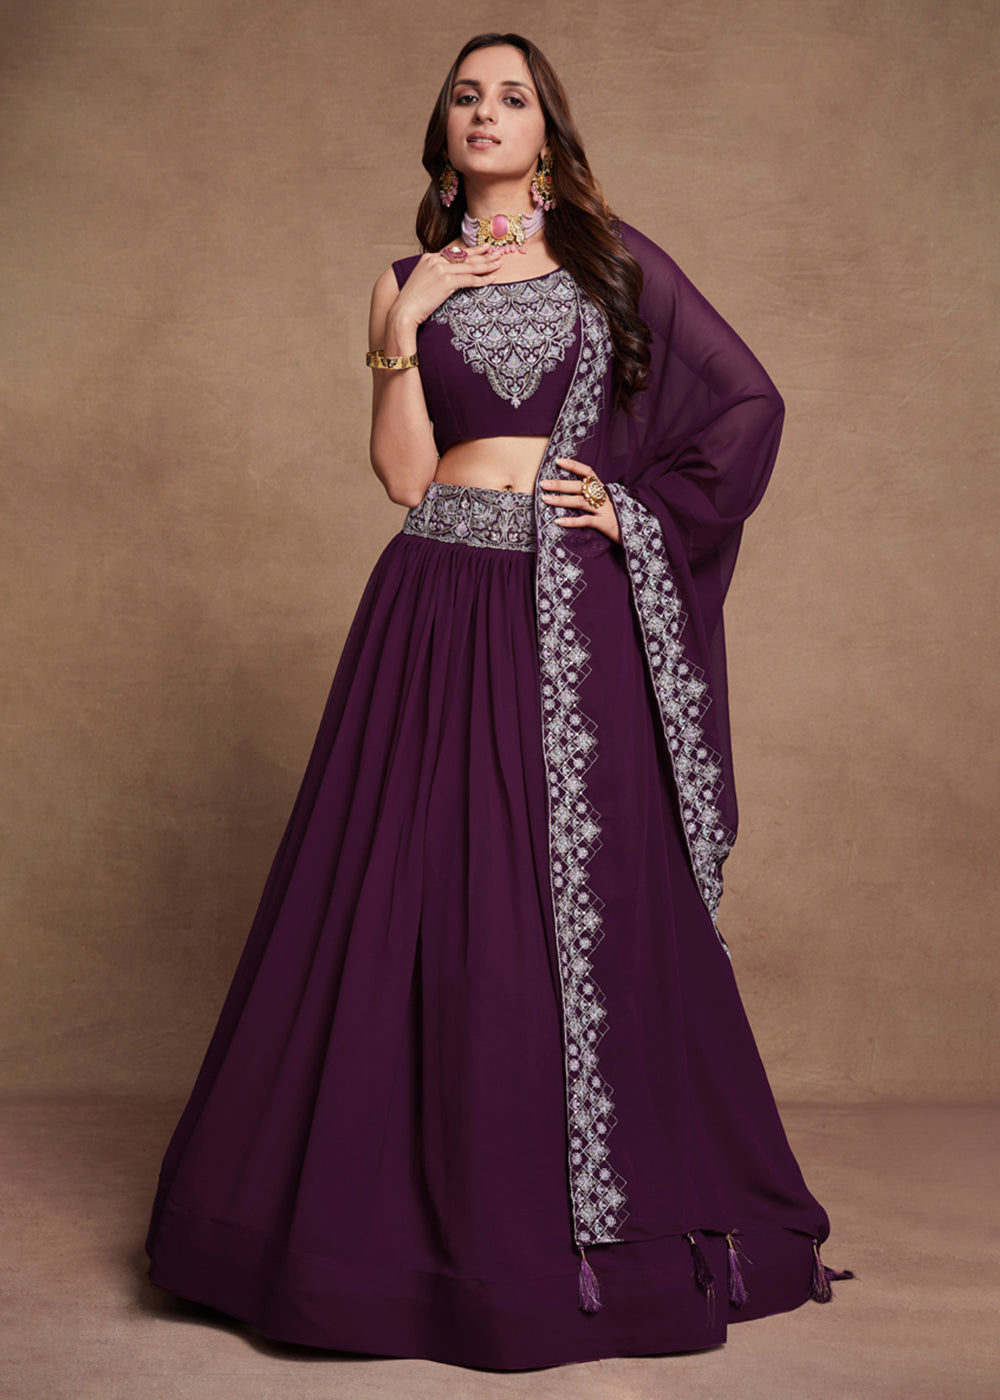 Buy Now Blooming Georgette Purple Embroidered Festive Lehenga Choli Online in USA, UK, Canada & Worldwide at Empress Clothing. 